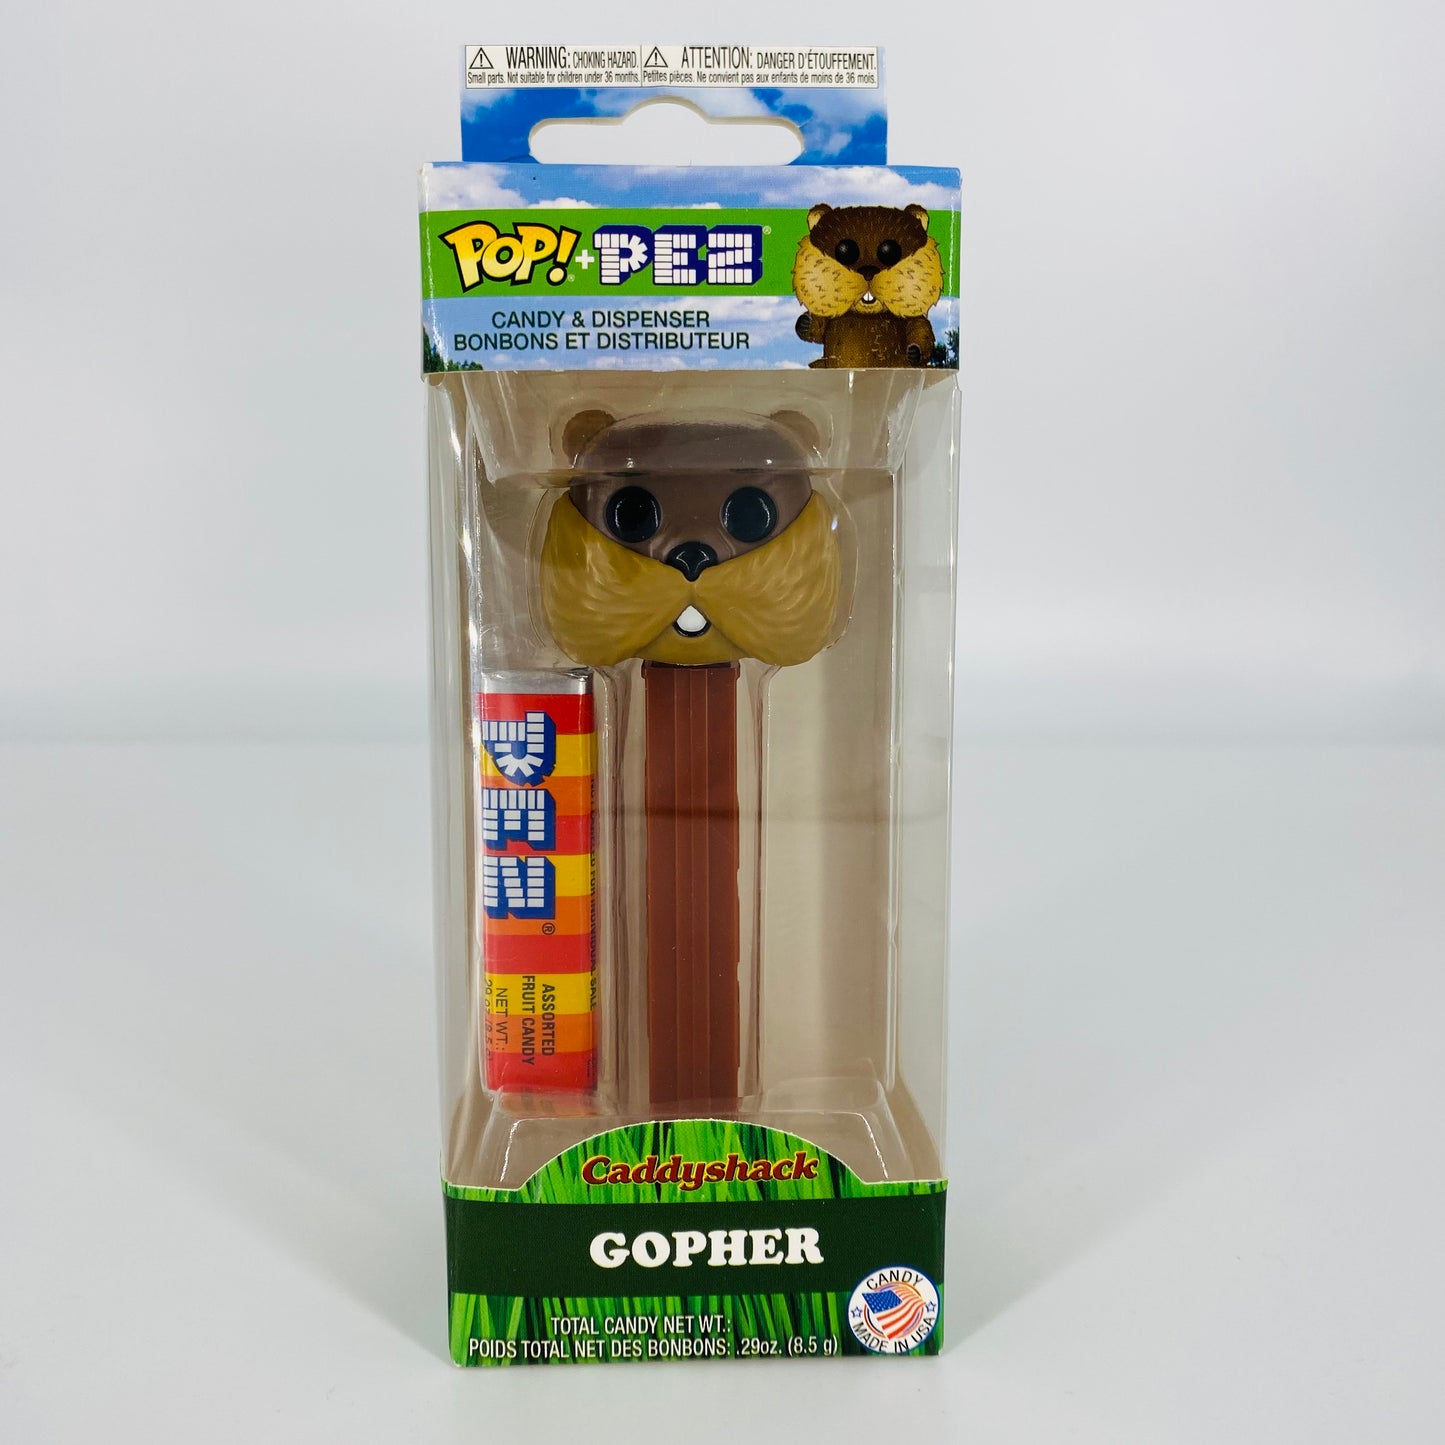 Caddyshack Carl Spackler and Gopher Pop! + PEZ dispensers (2019) boxed